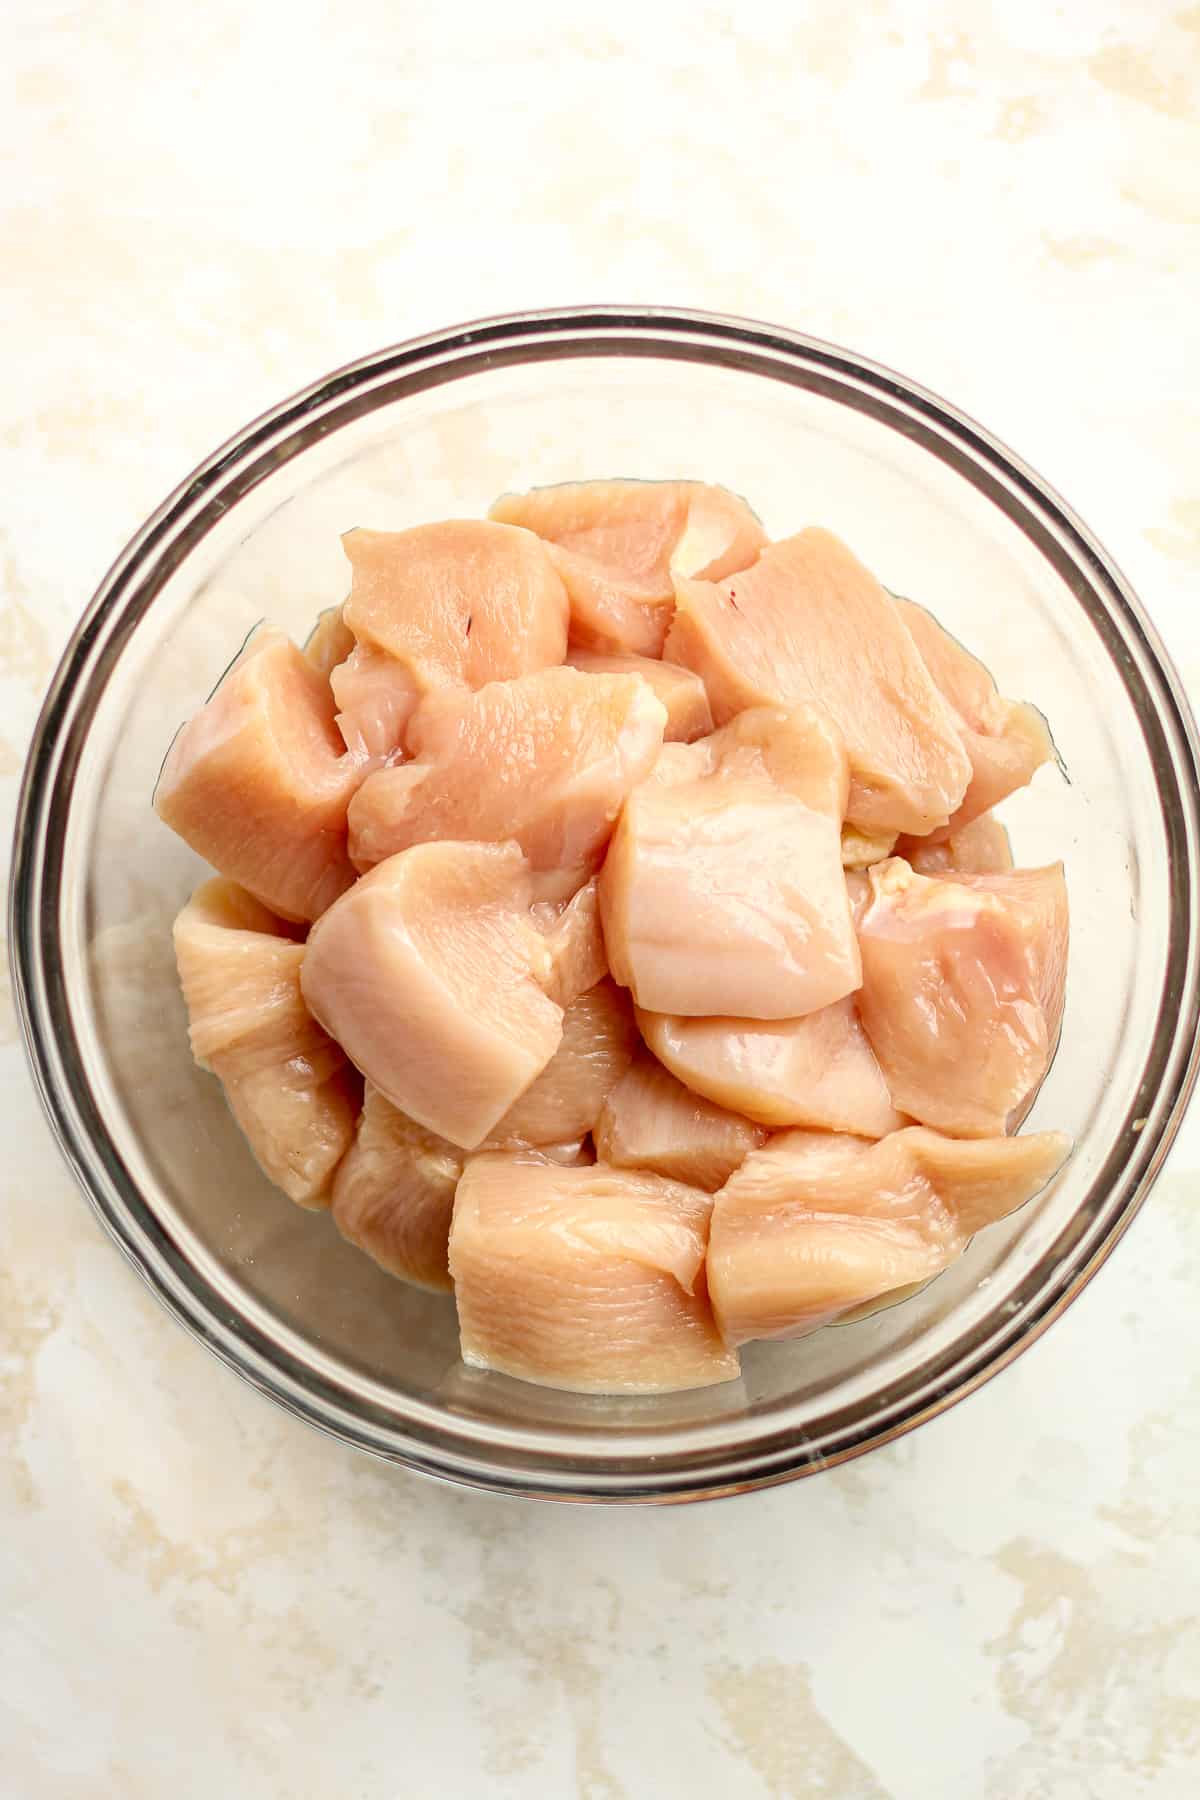 Raw chicken cubes in a glass bowl.